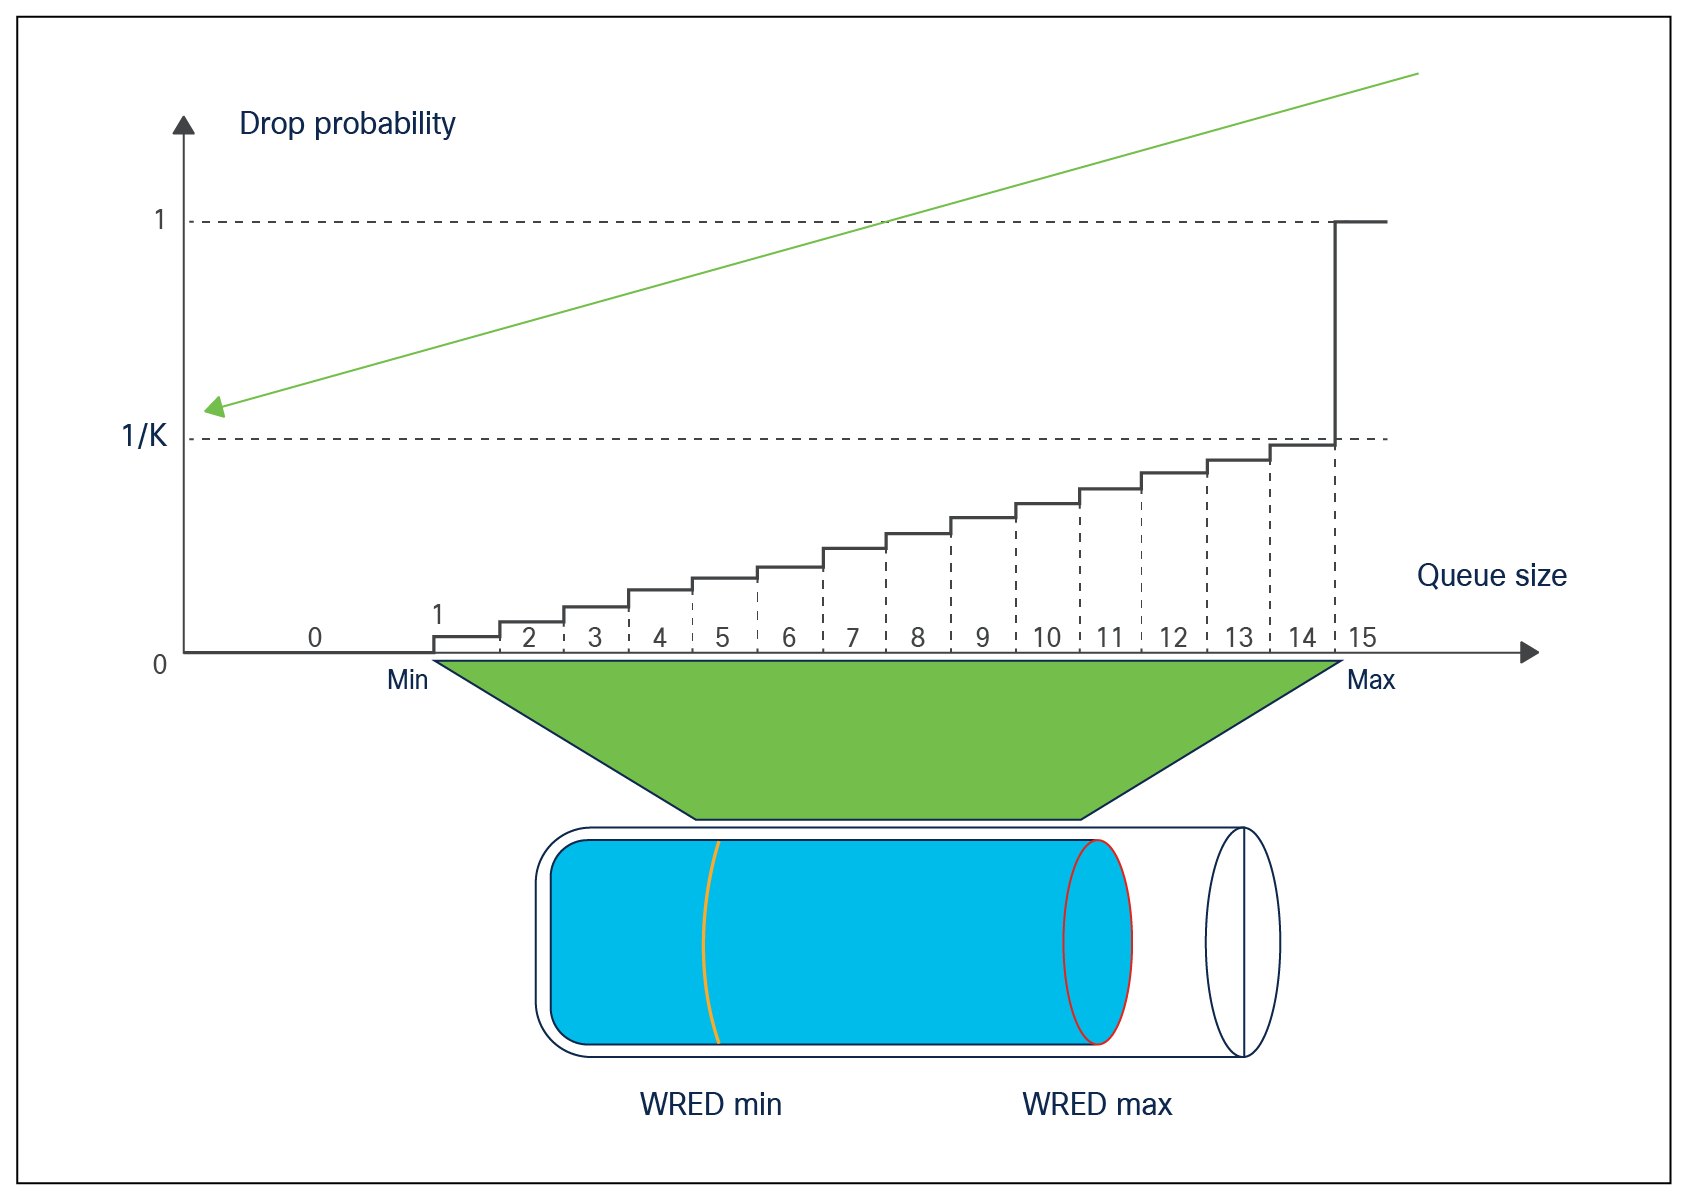 WRED drop probability graph